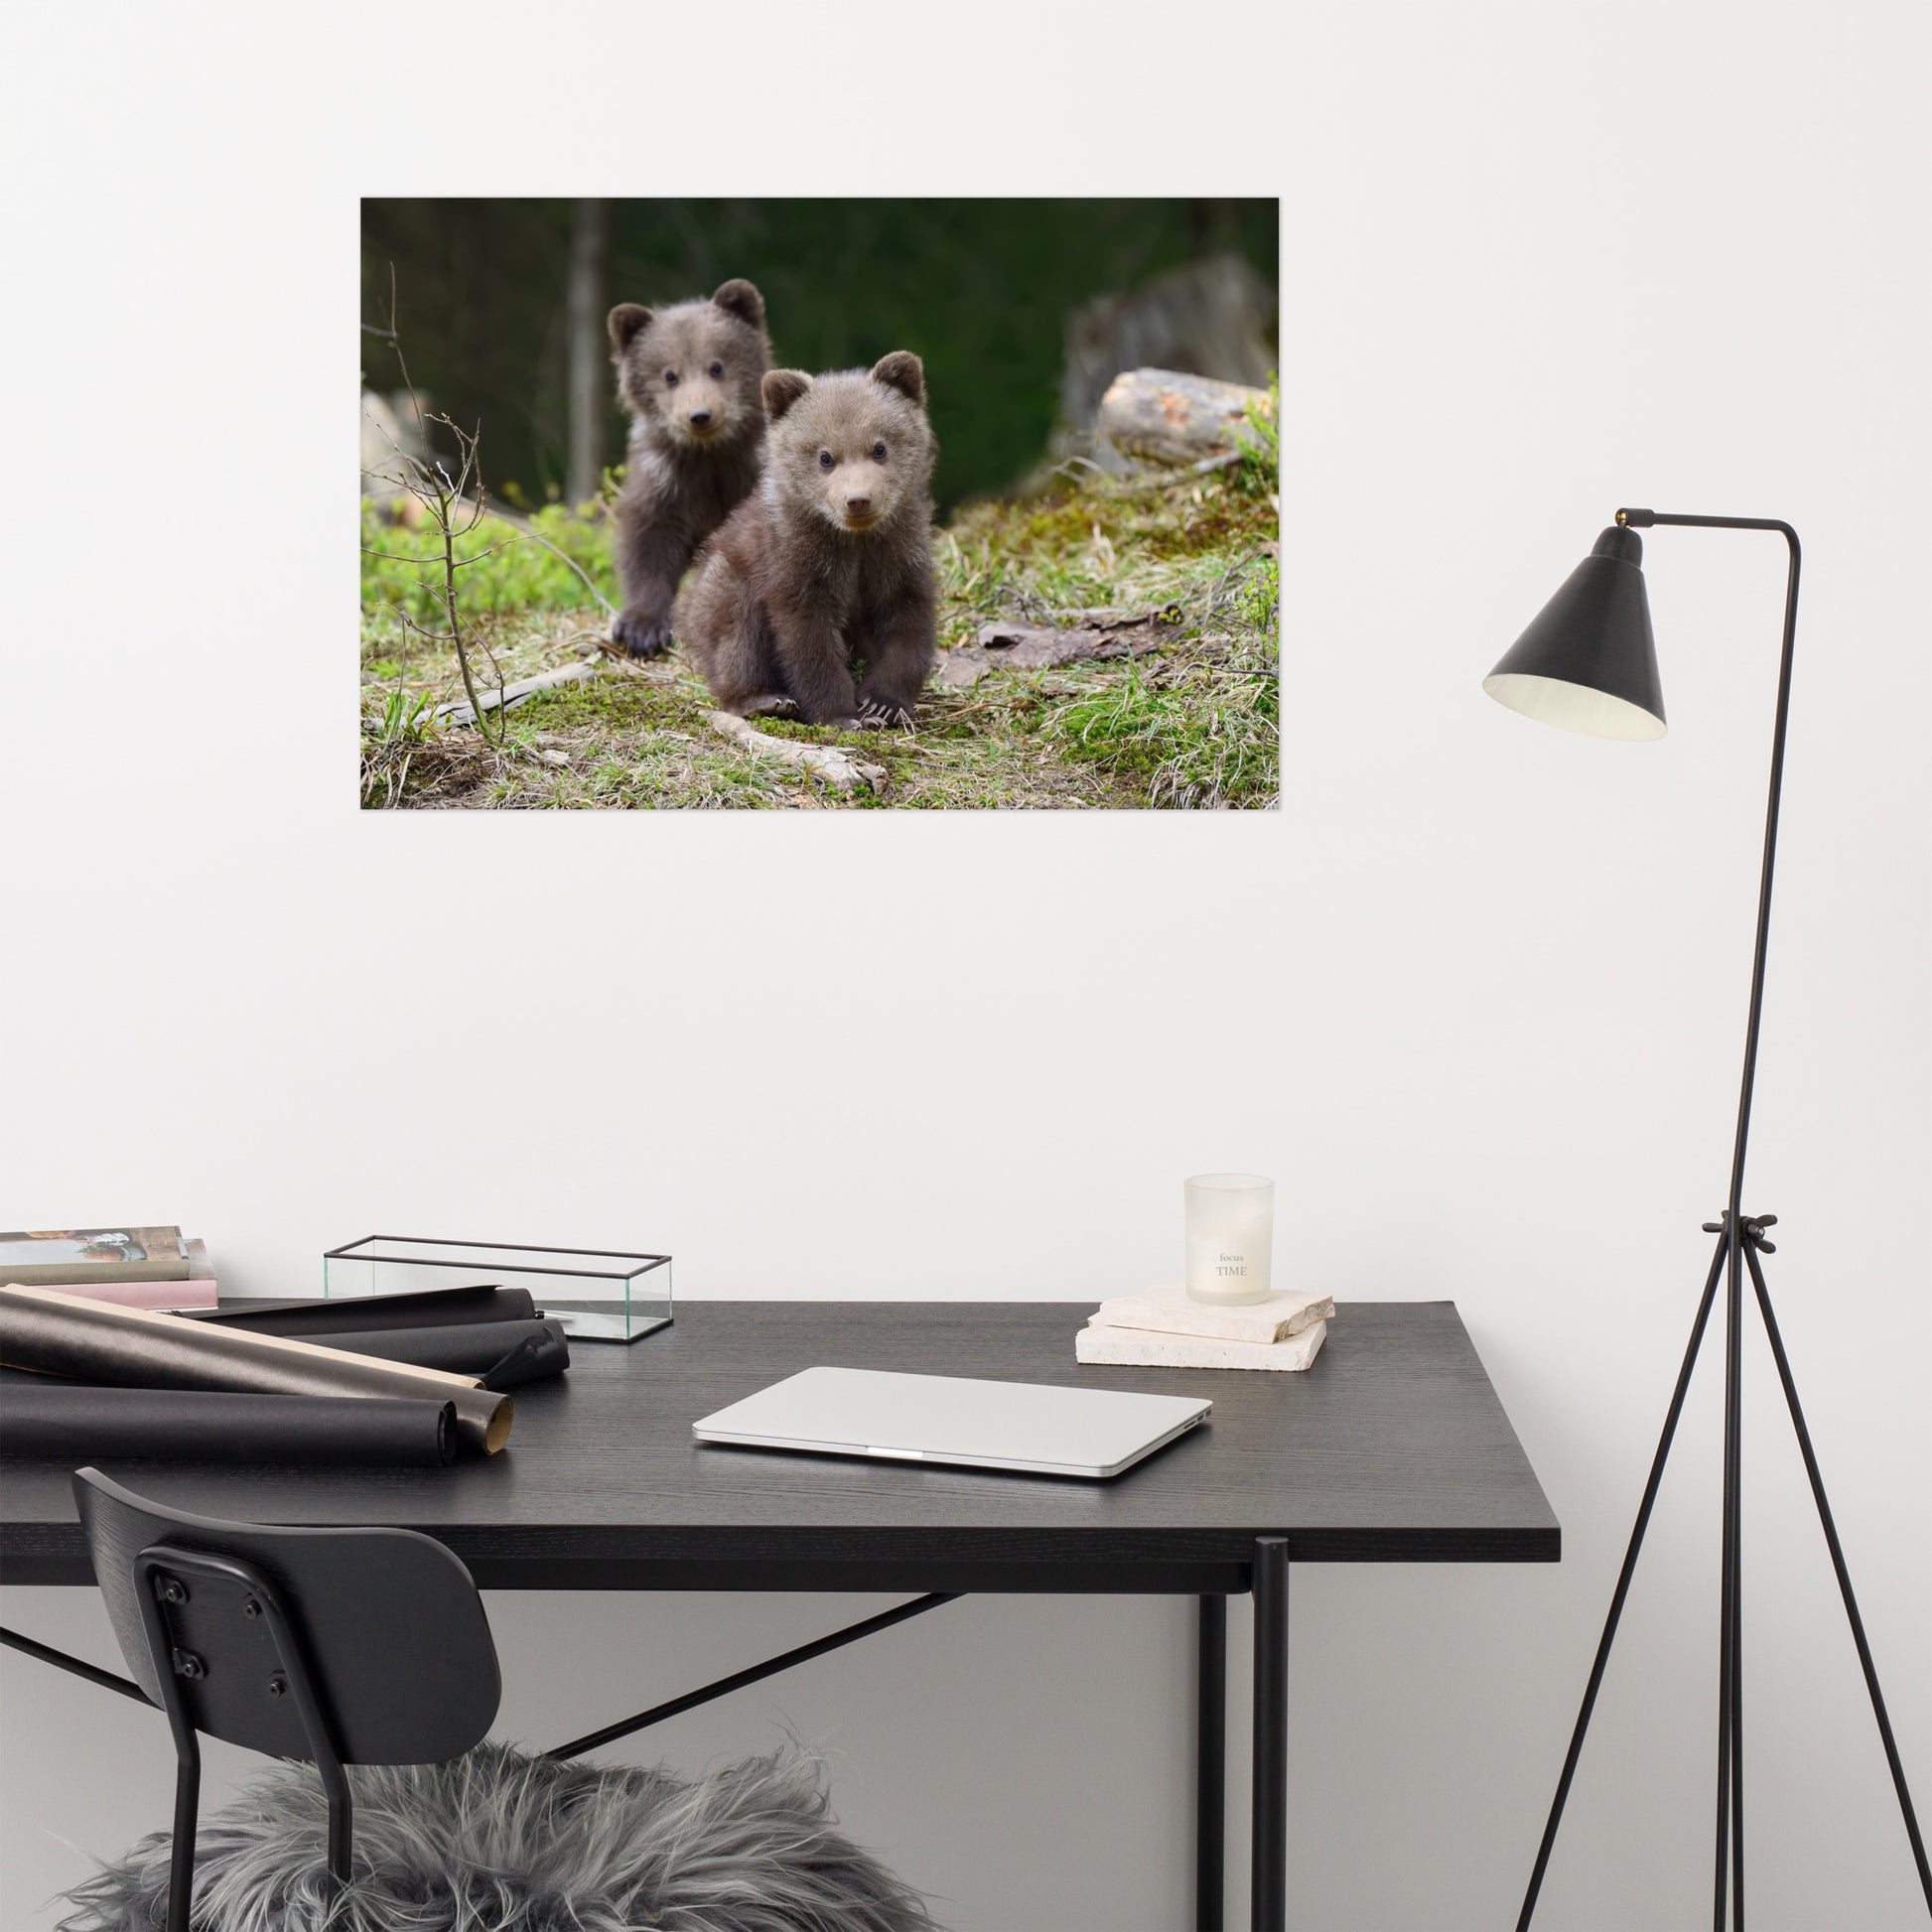 Pediatric Dental Office Wall Decor: Adorable Grizzly Bear Cubs In The Trees Animal / Wildlife / Nature Photograph - Loose / Unframed / Frameable / Frameless Wall Art Print / Artwork